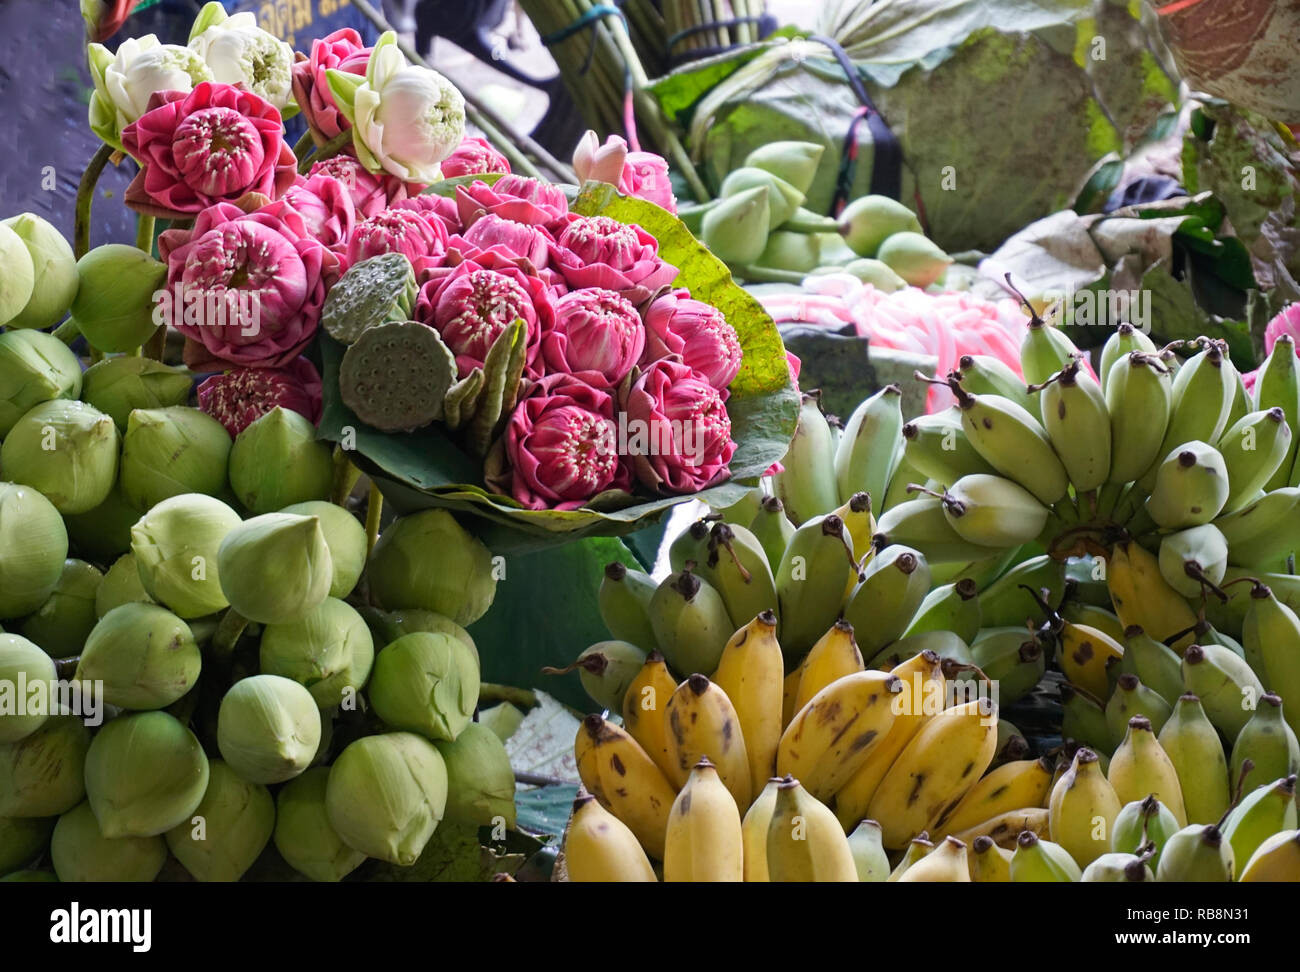 Central market or Psar Thmei market in the city of Phnom Penh of Cambodia. Stock Photo